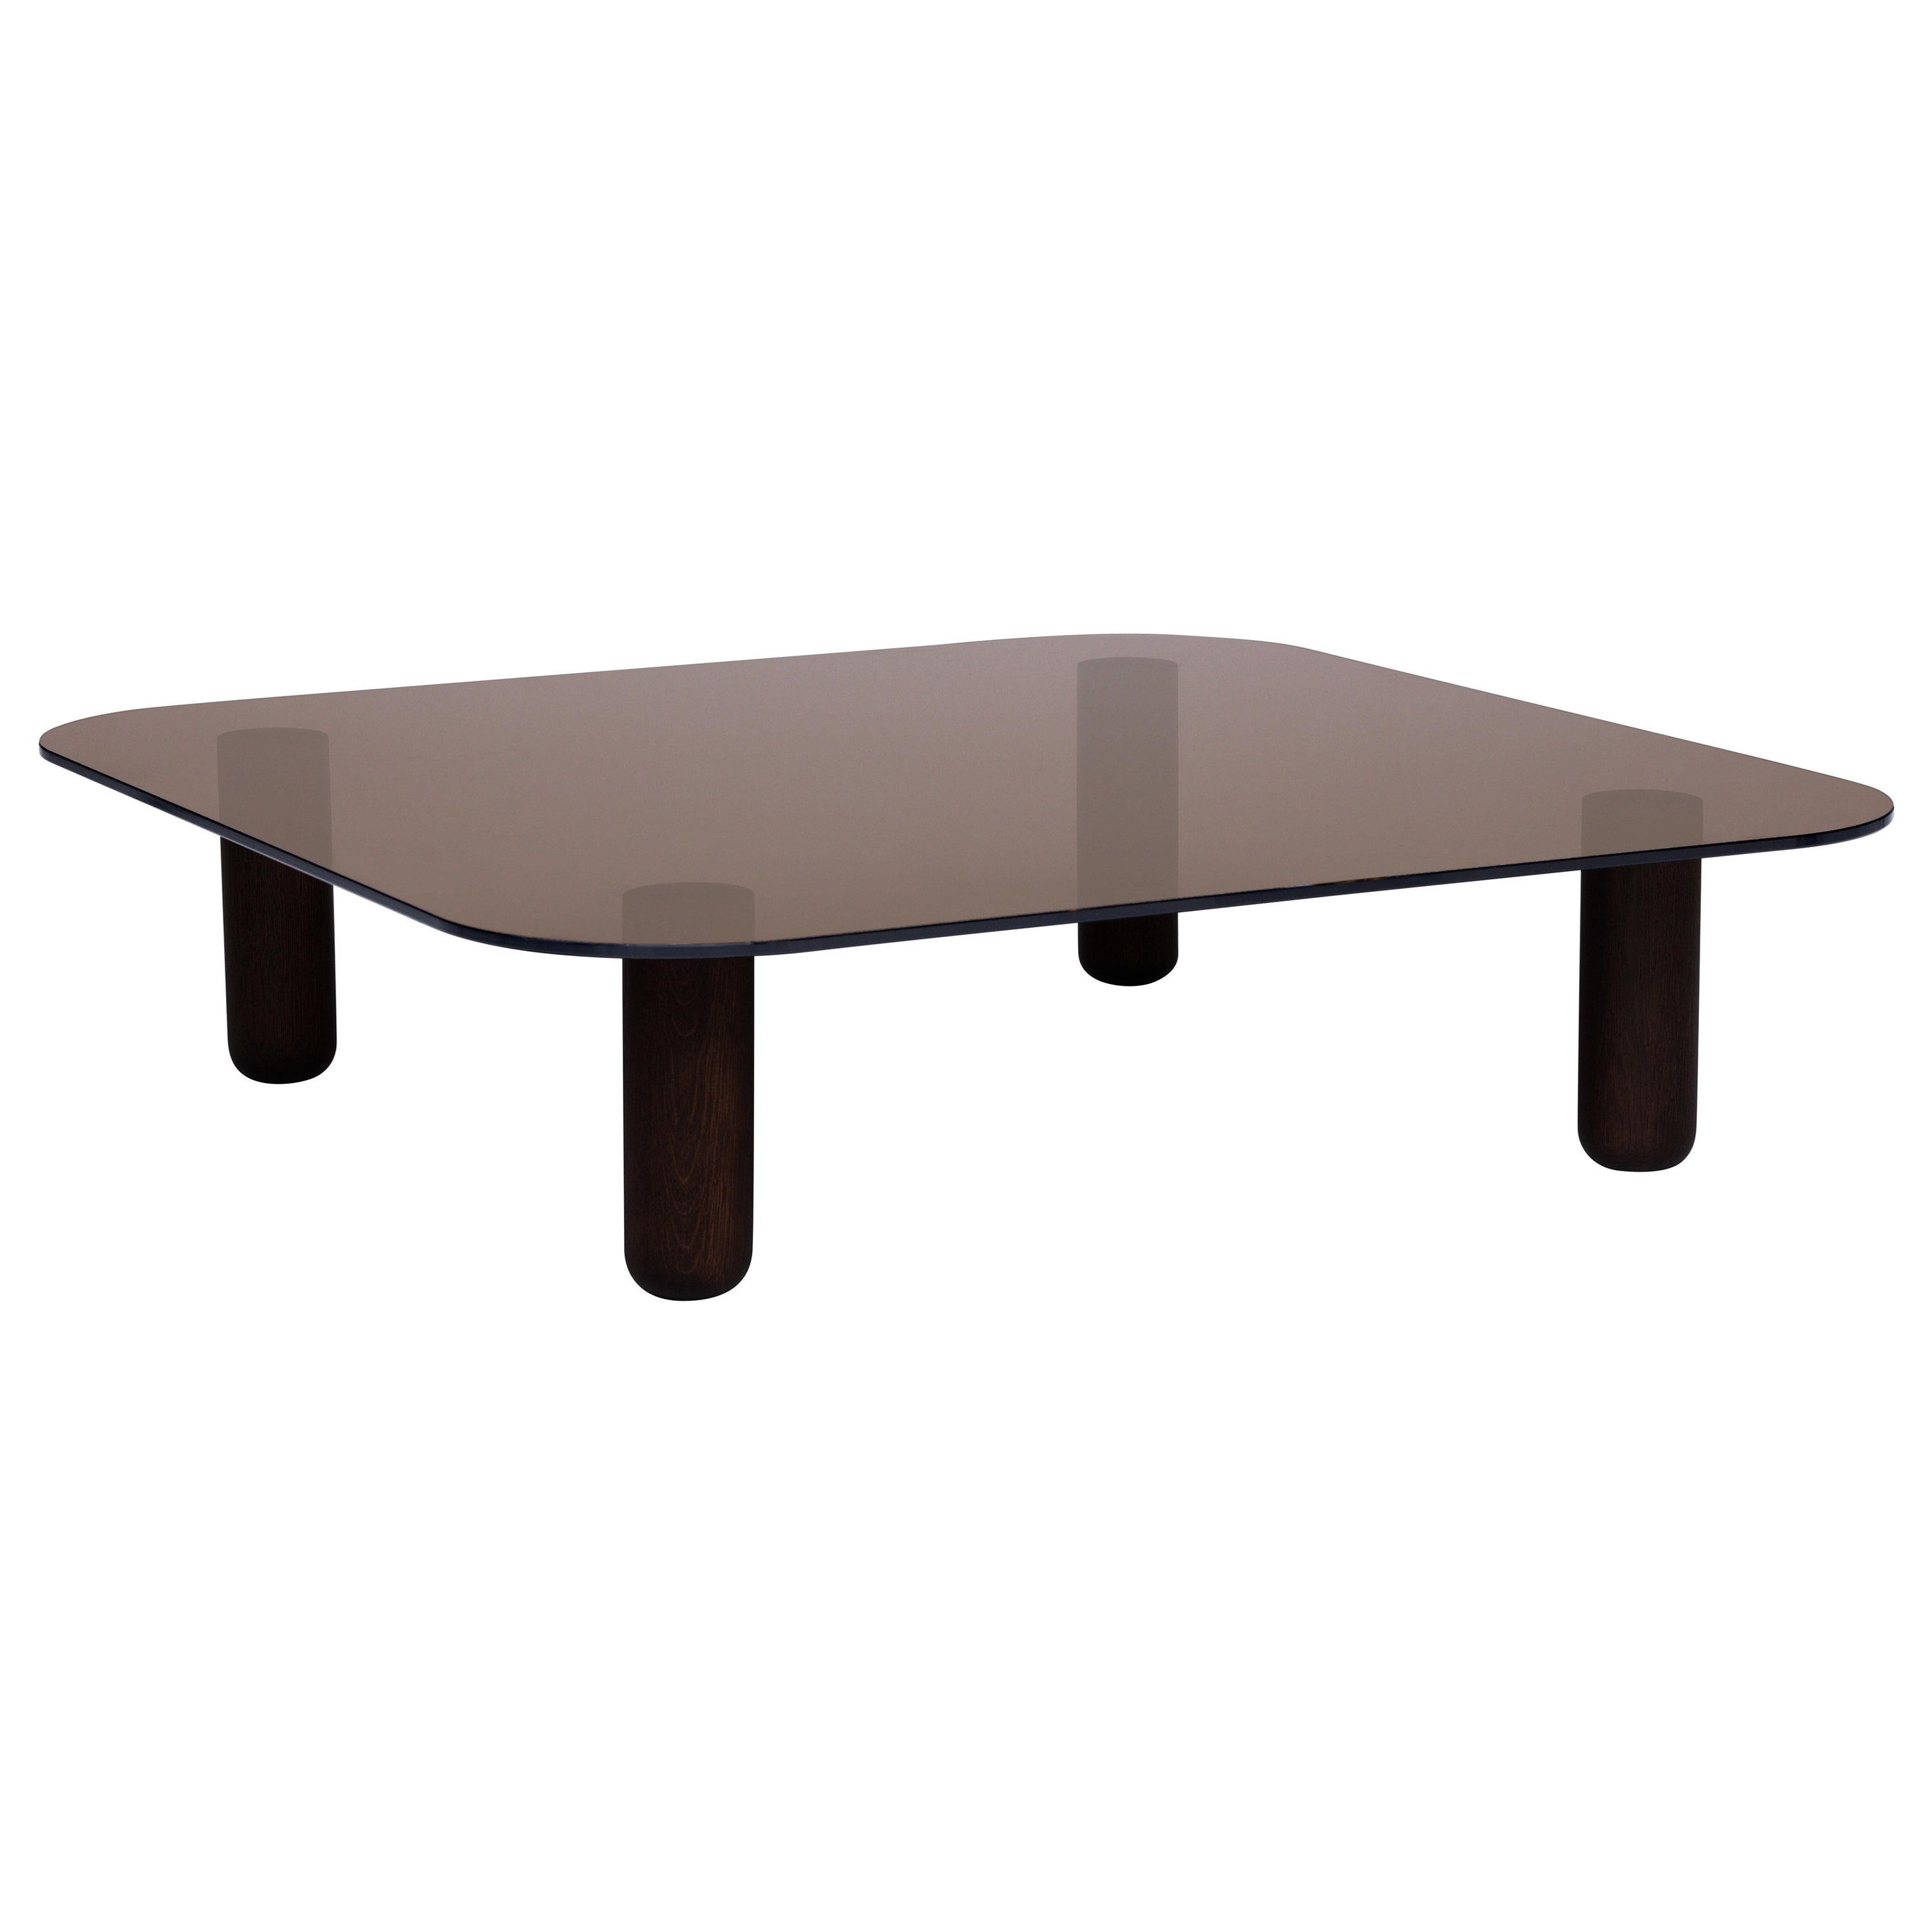 Big Sur Low Table by Fogia, Brown Glass, Wenge Legs For Sale